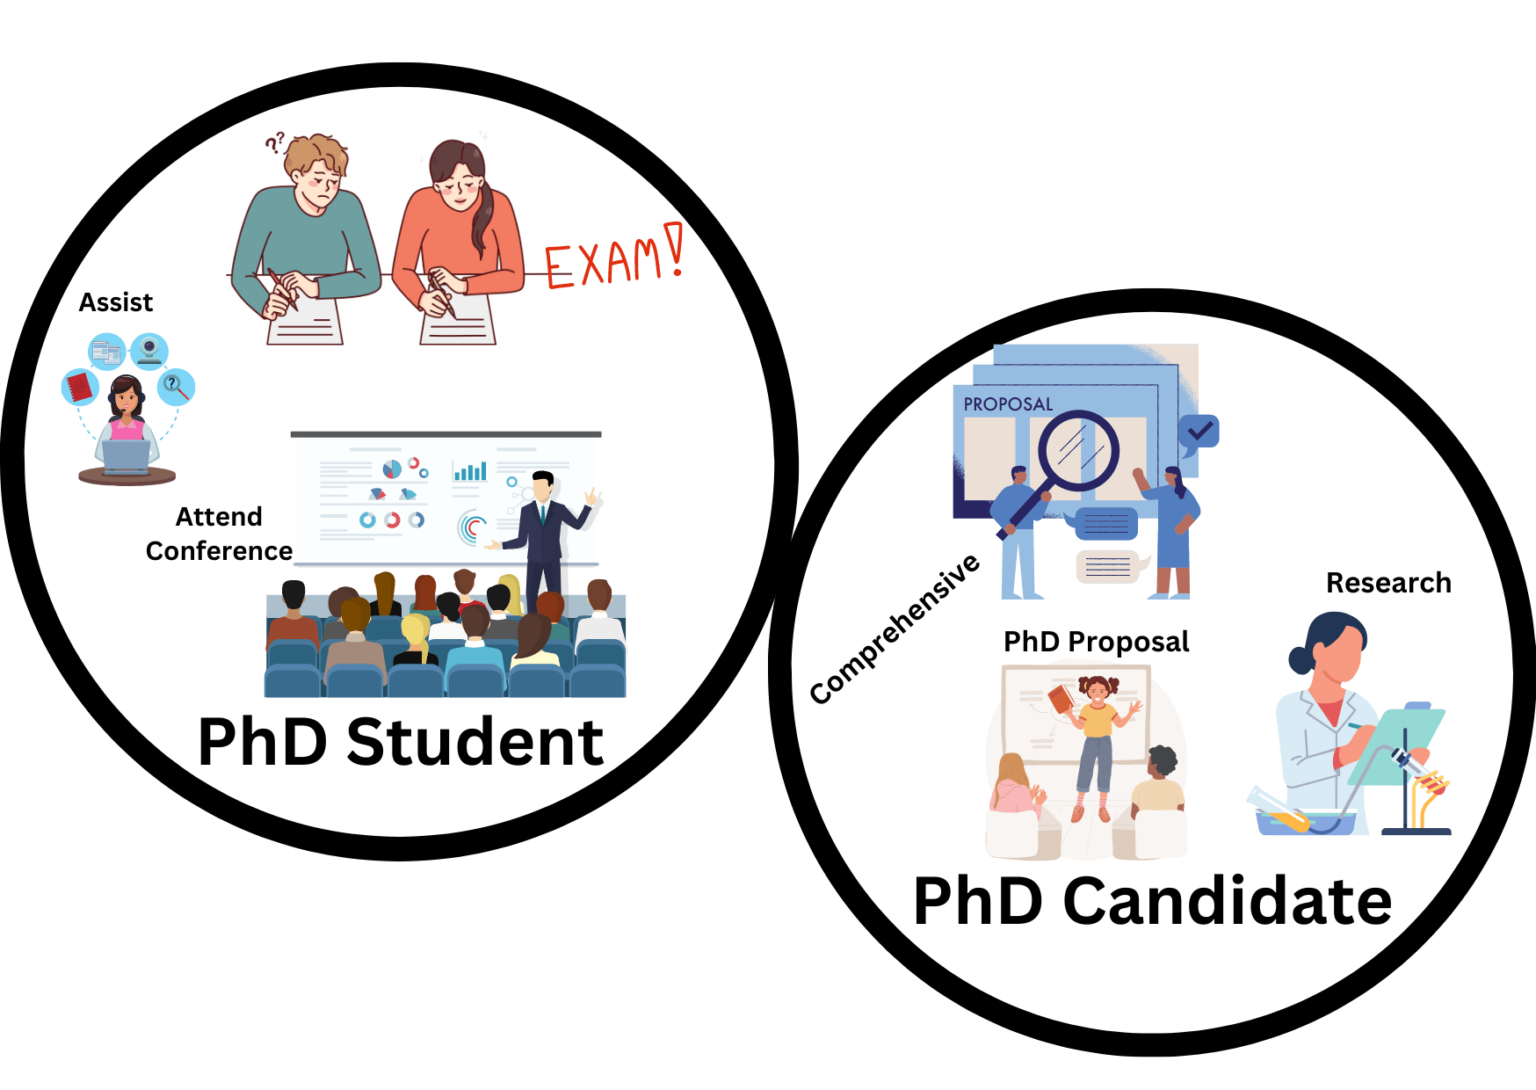 phd researcher or phd student